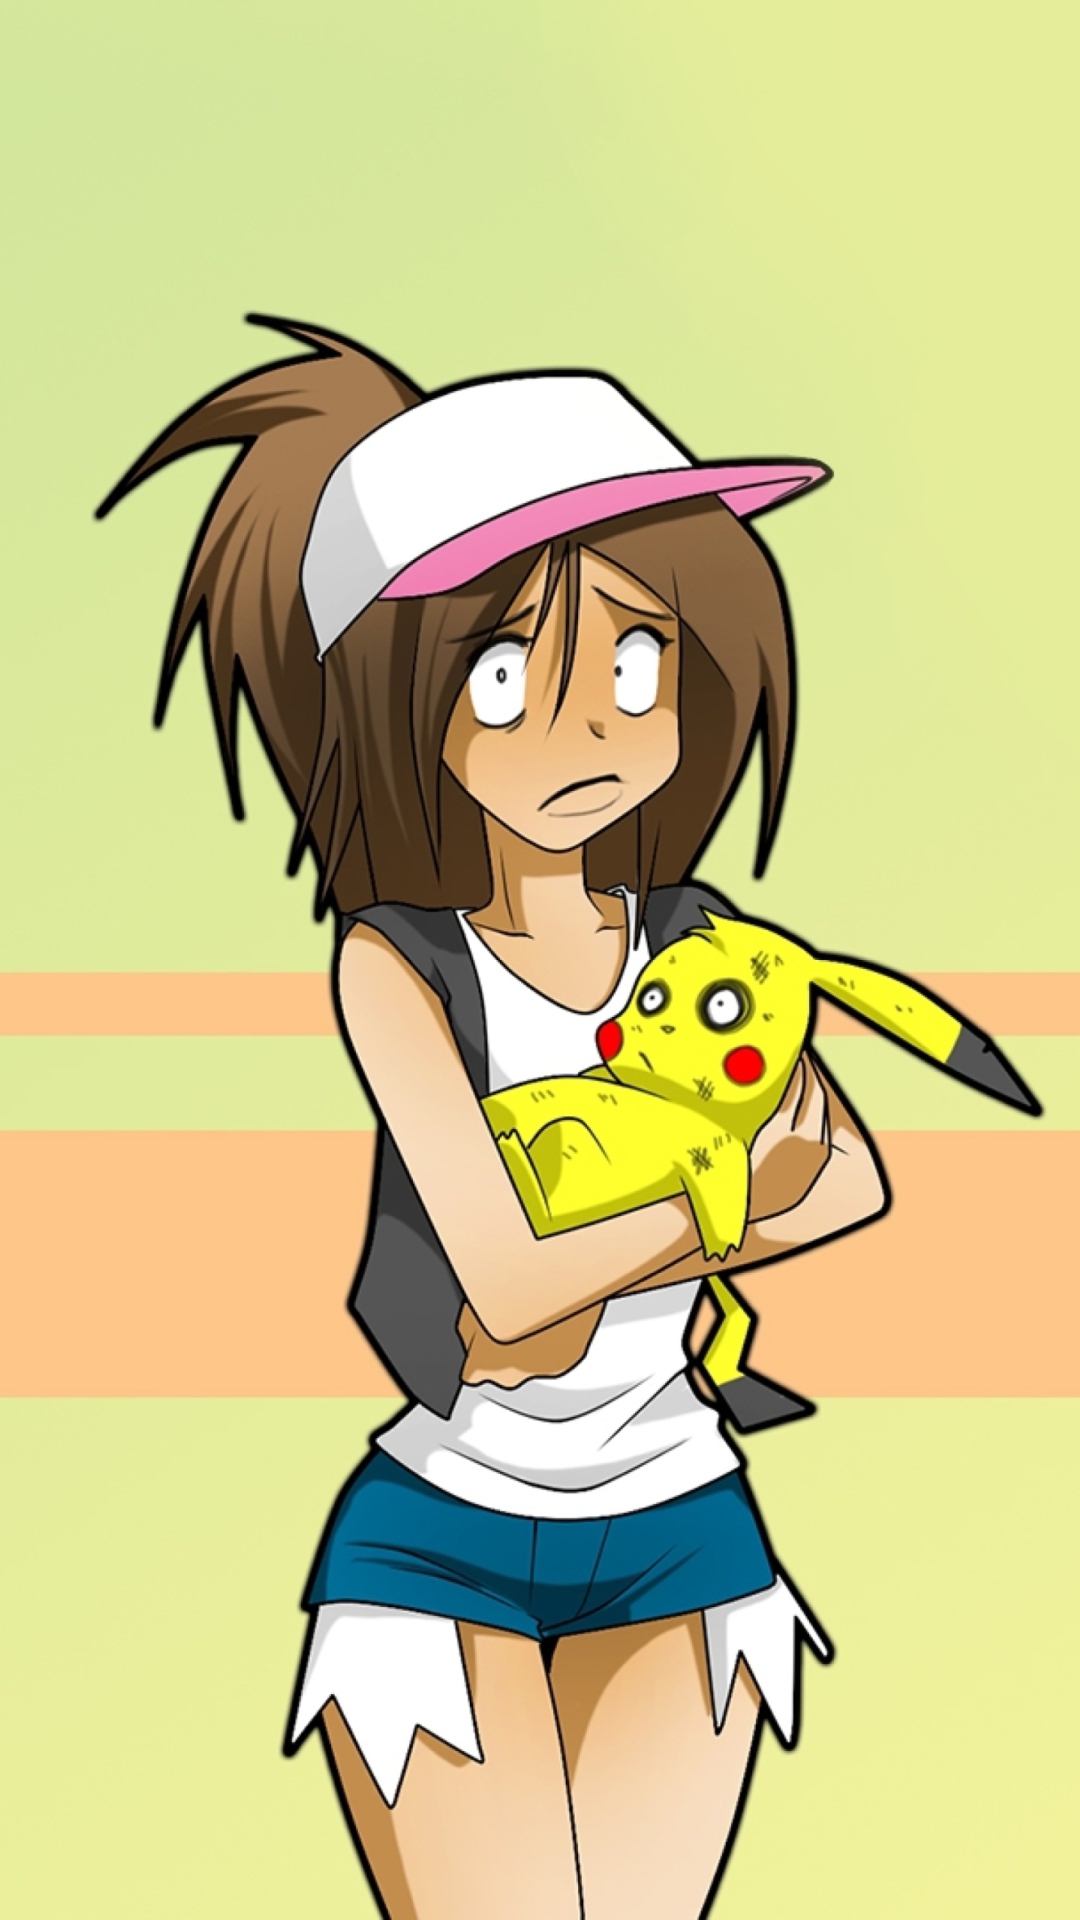 Hipster Girl And Her Pikachu wallpaper 1080x1920